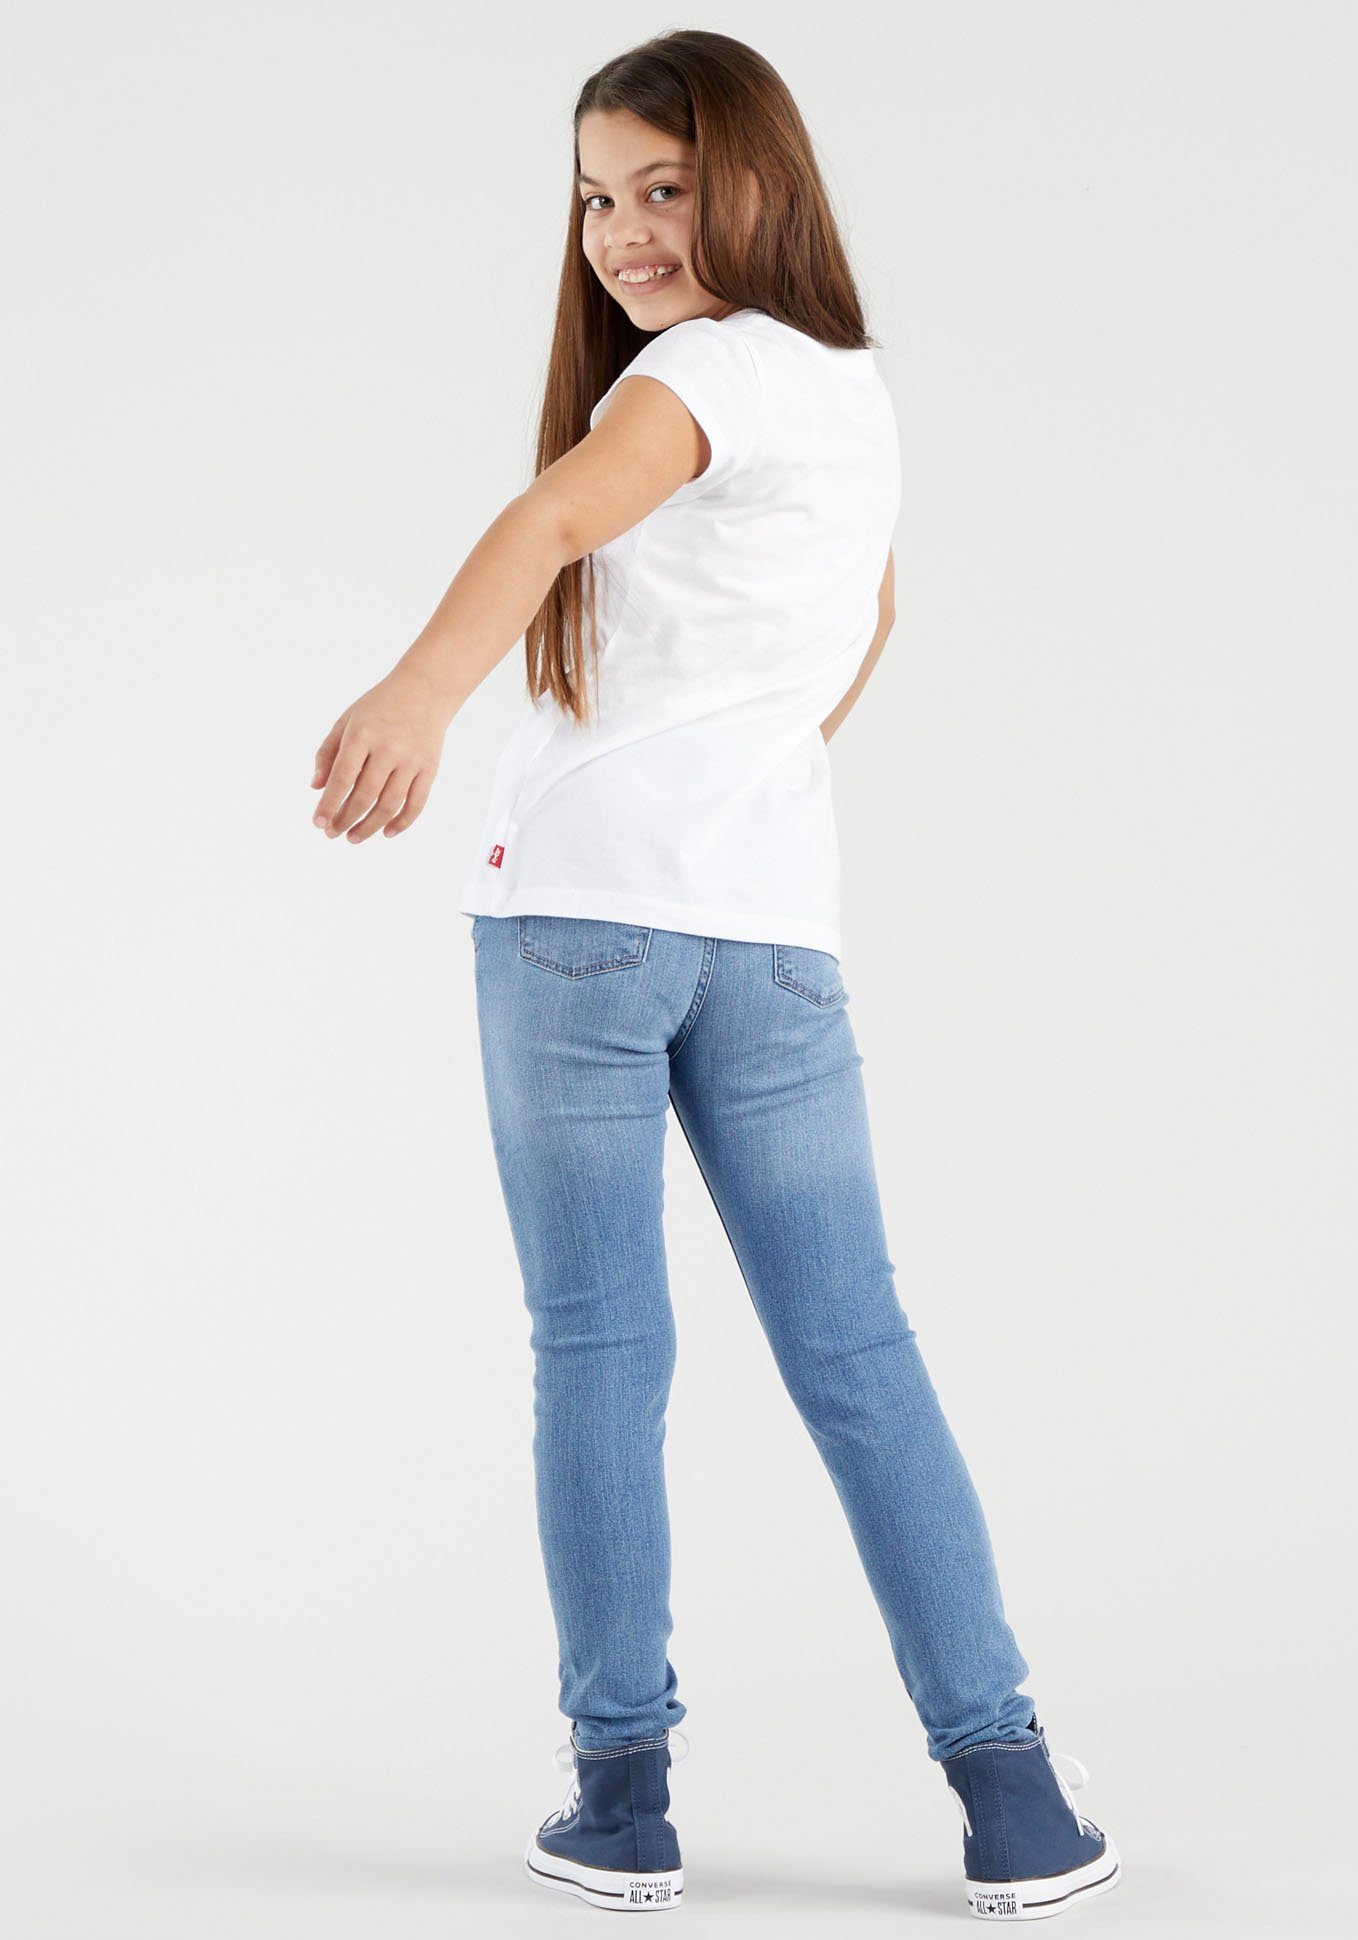 Levi's® Kids used HIGH SKINNY for 720™ SUPER RISE Stretch-Jeans light GIRLS blue